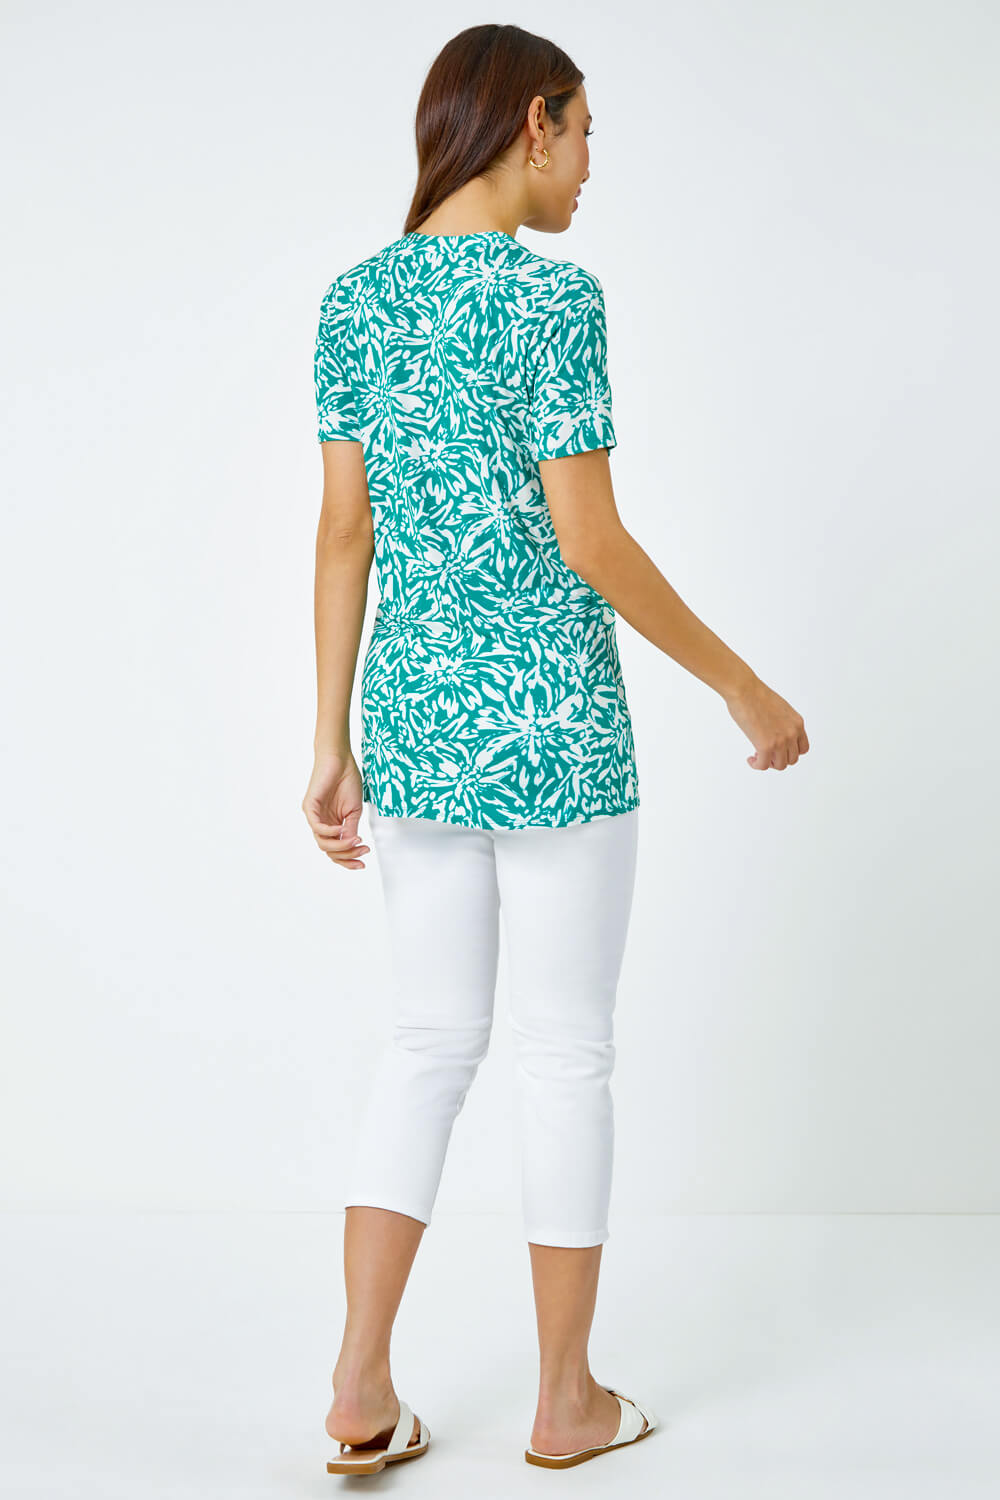 Green Abstract Floral Print Top, Image 3 of 5